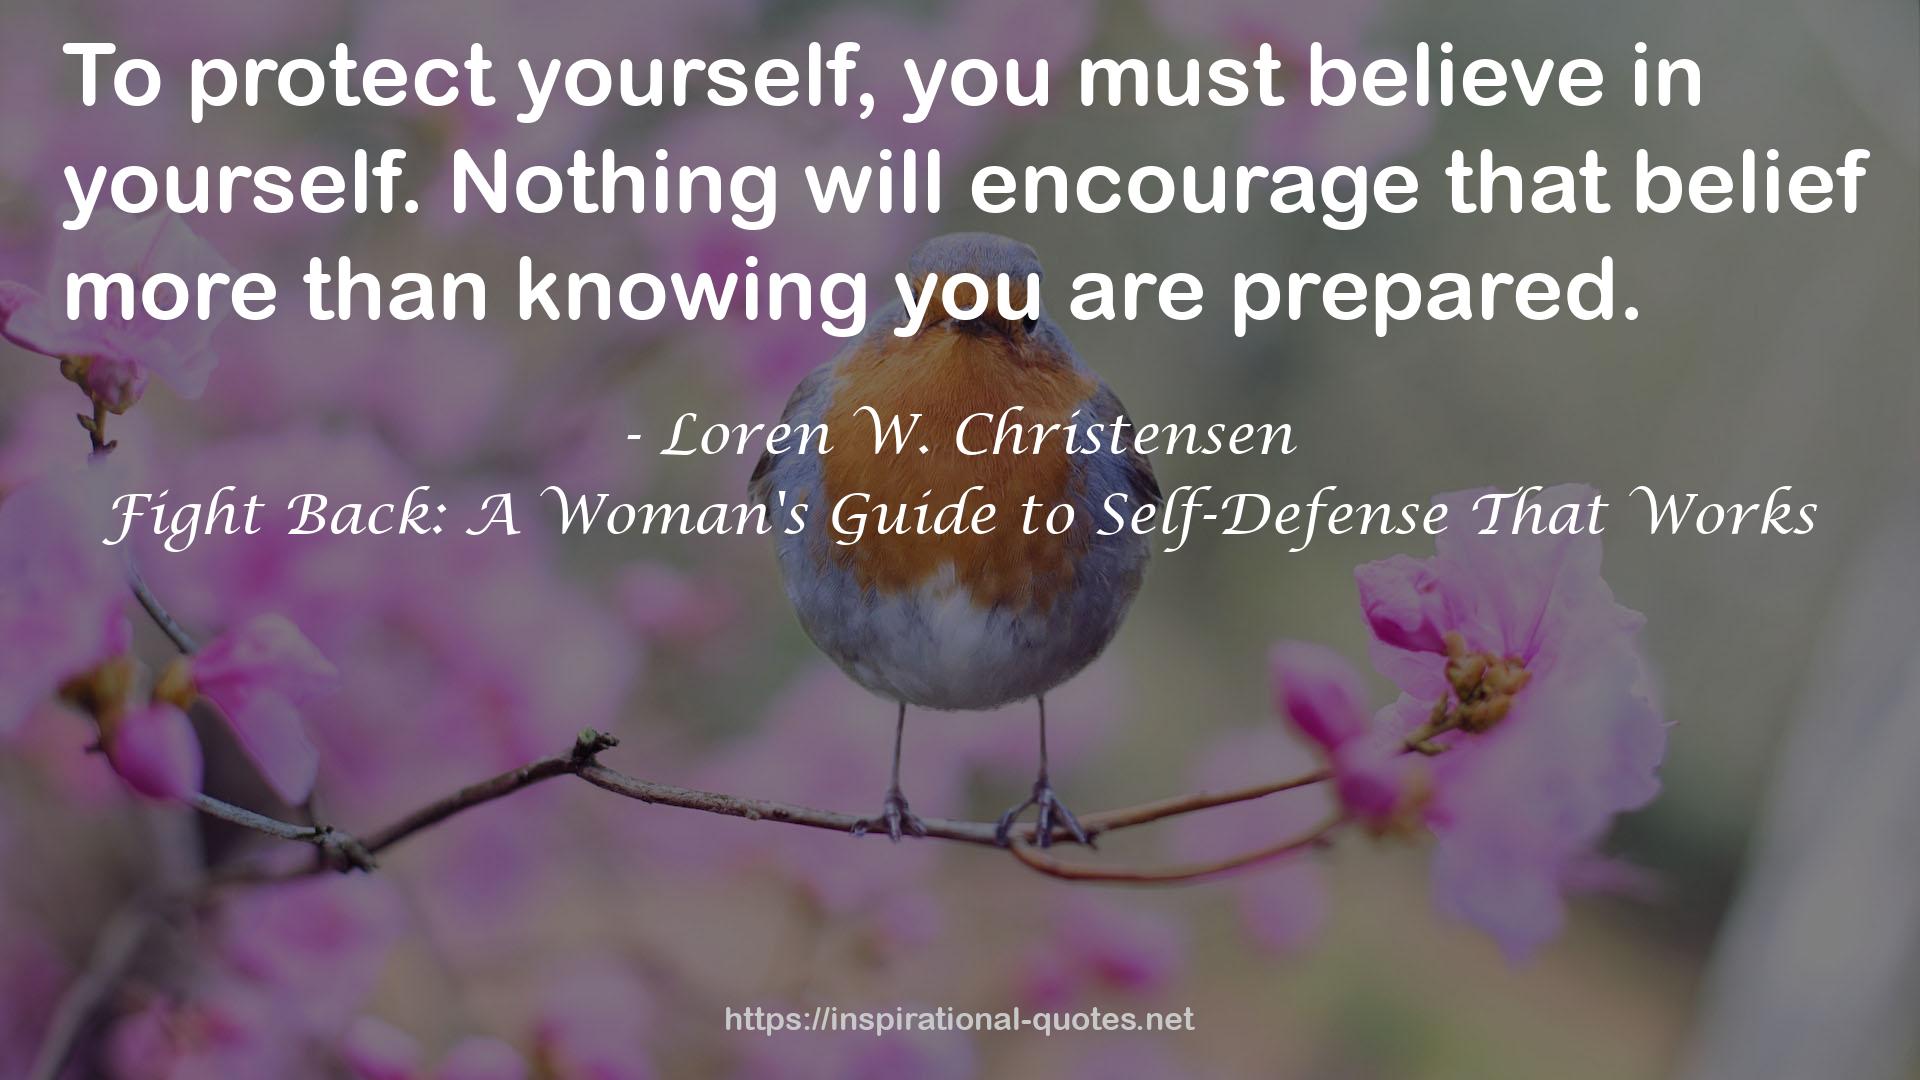 Fight Back: A Woman's Guide to Self-Defense That Works QUOTES